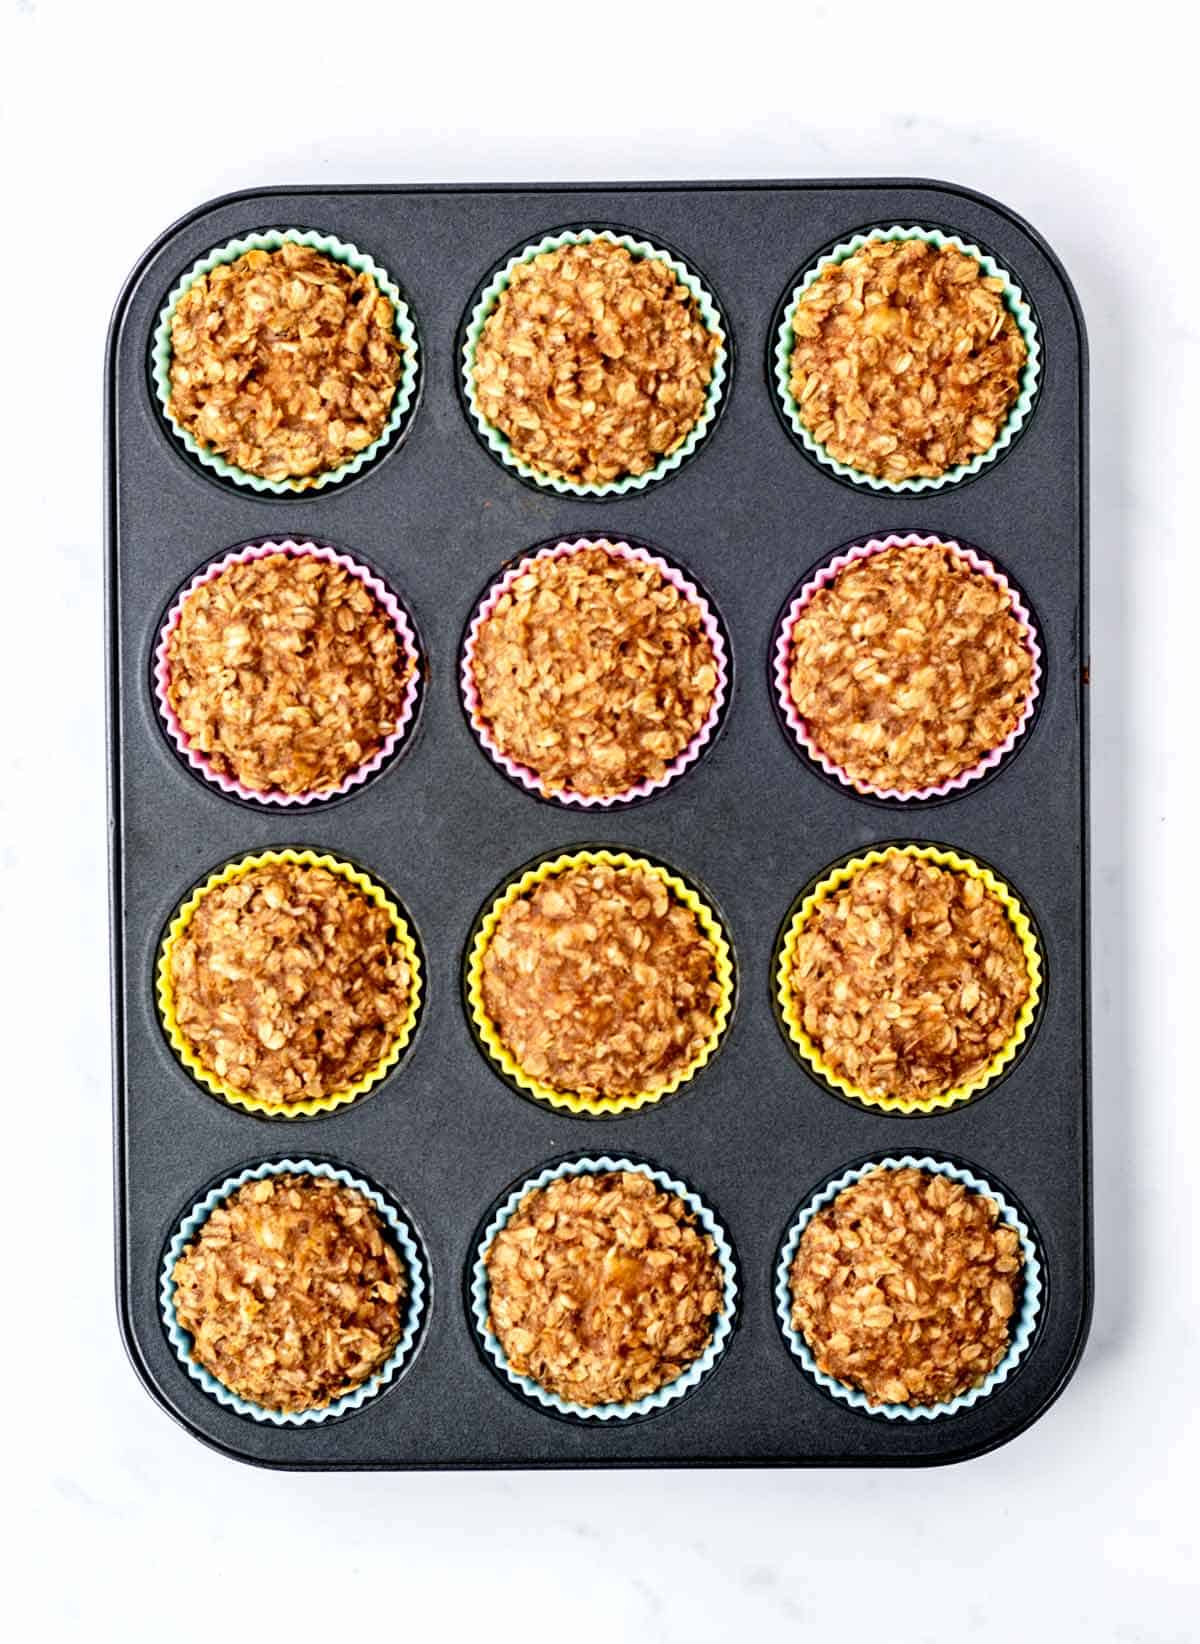 Baked 3-ingredient banana oatmeal muffins in a muffin tin.